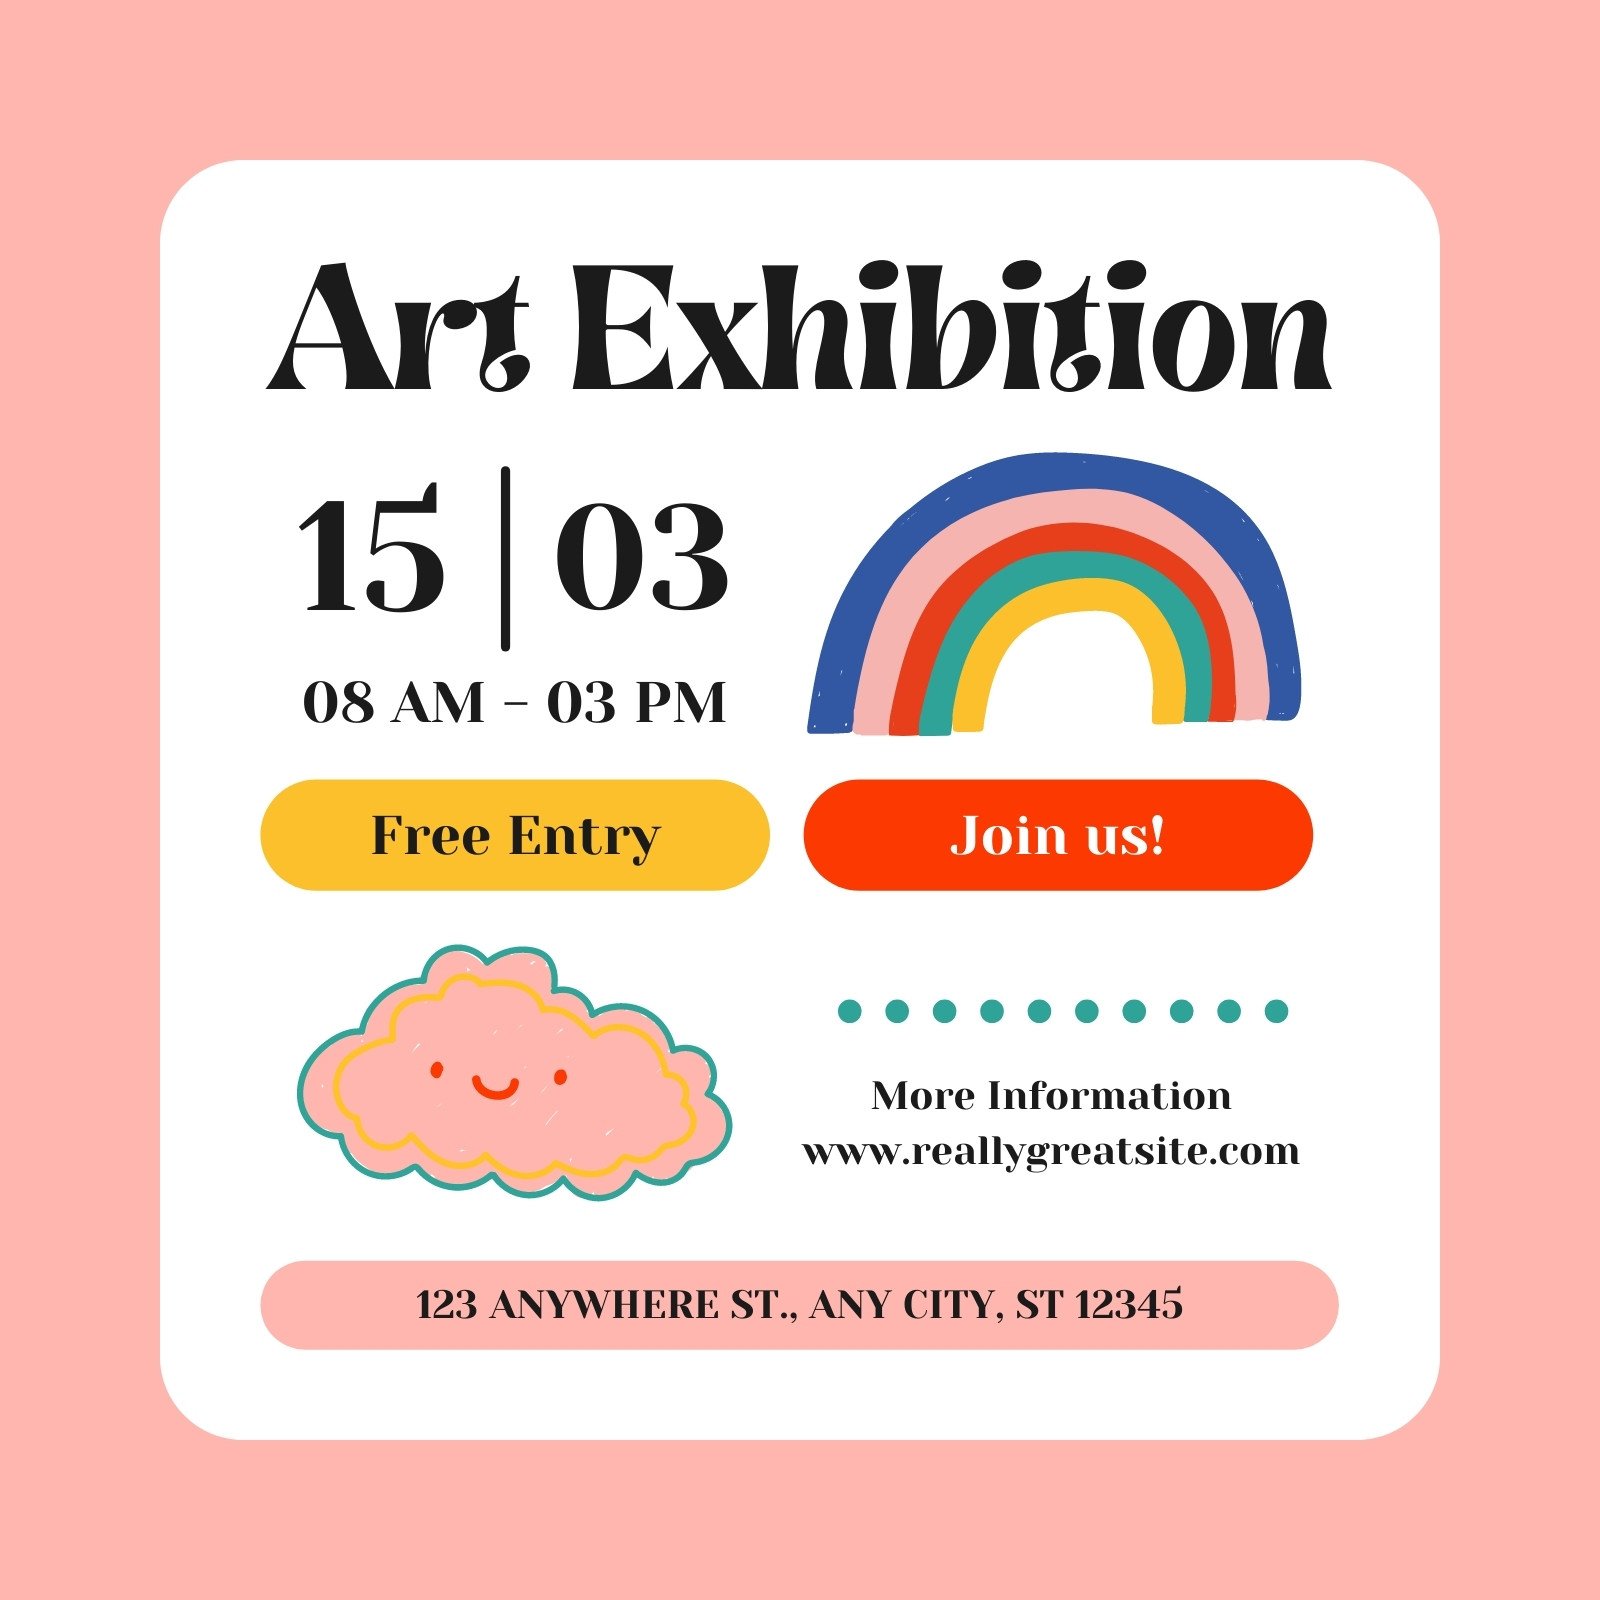 Pink Aesthetic Illustrated Art Exhibition Instagram Post